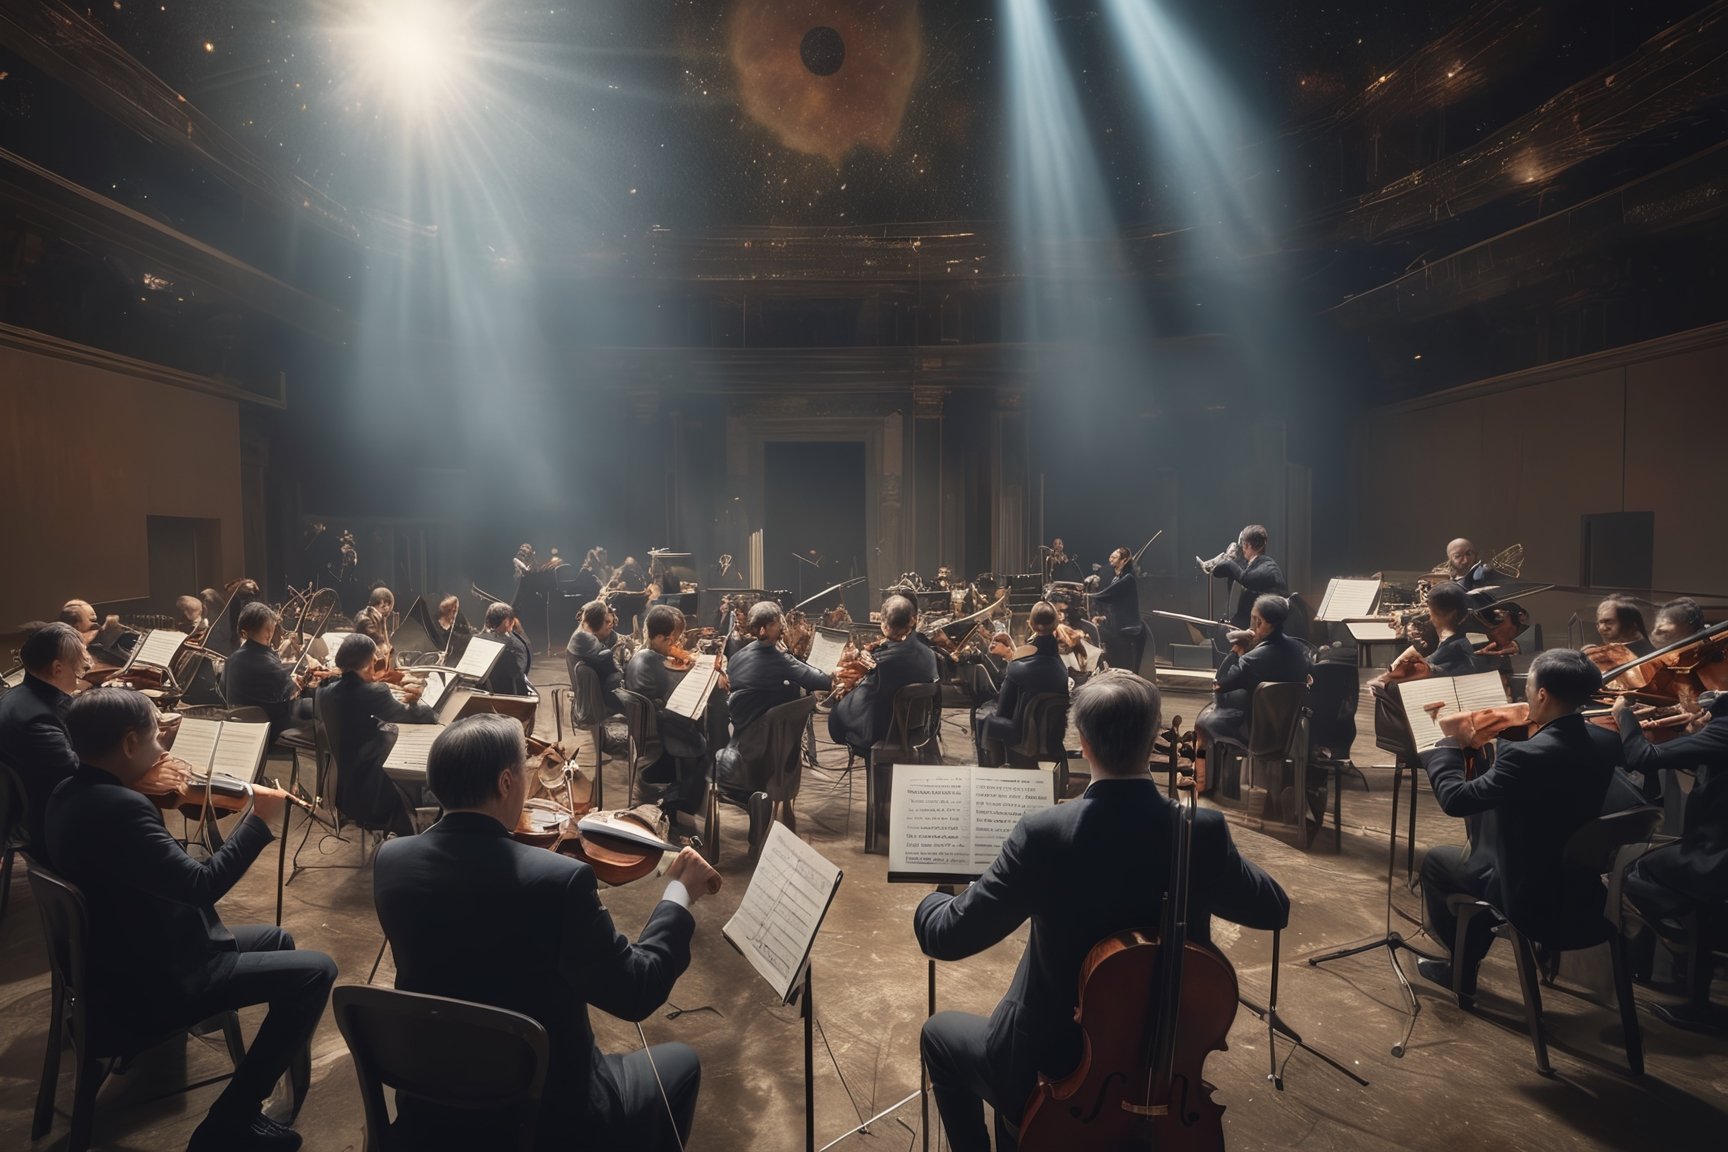 RAW photo,
An orchestra playing at the end of time. Cosmic vibe.

absurdres, masterpiece, award-winning photography, Volumetric lighting, extremely detailed, highest quality photo, RAW photo, 16k resolution, Fujifilm XT3, sharp focus, realistic texture